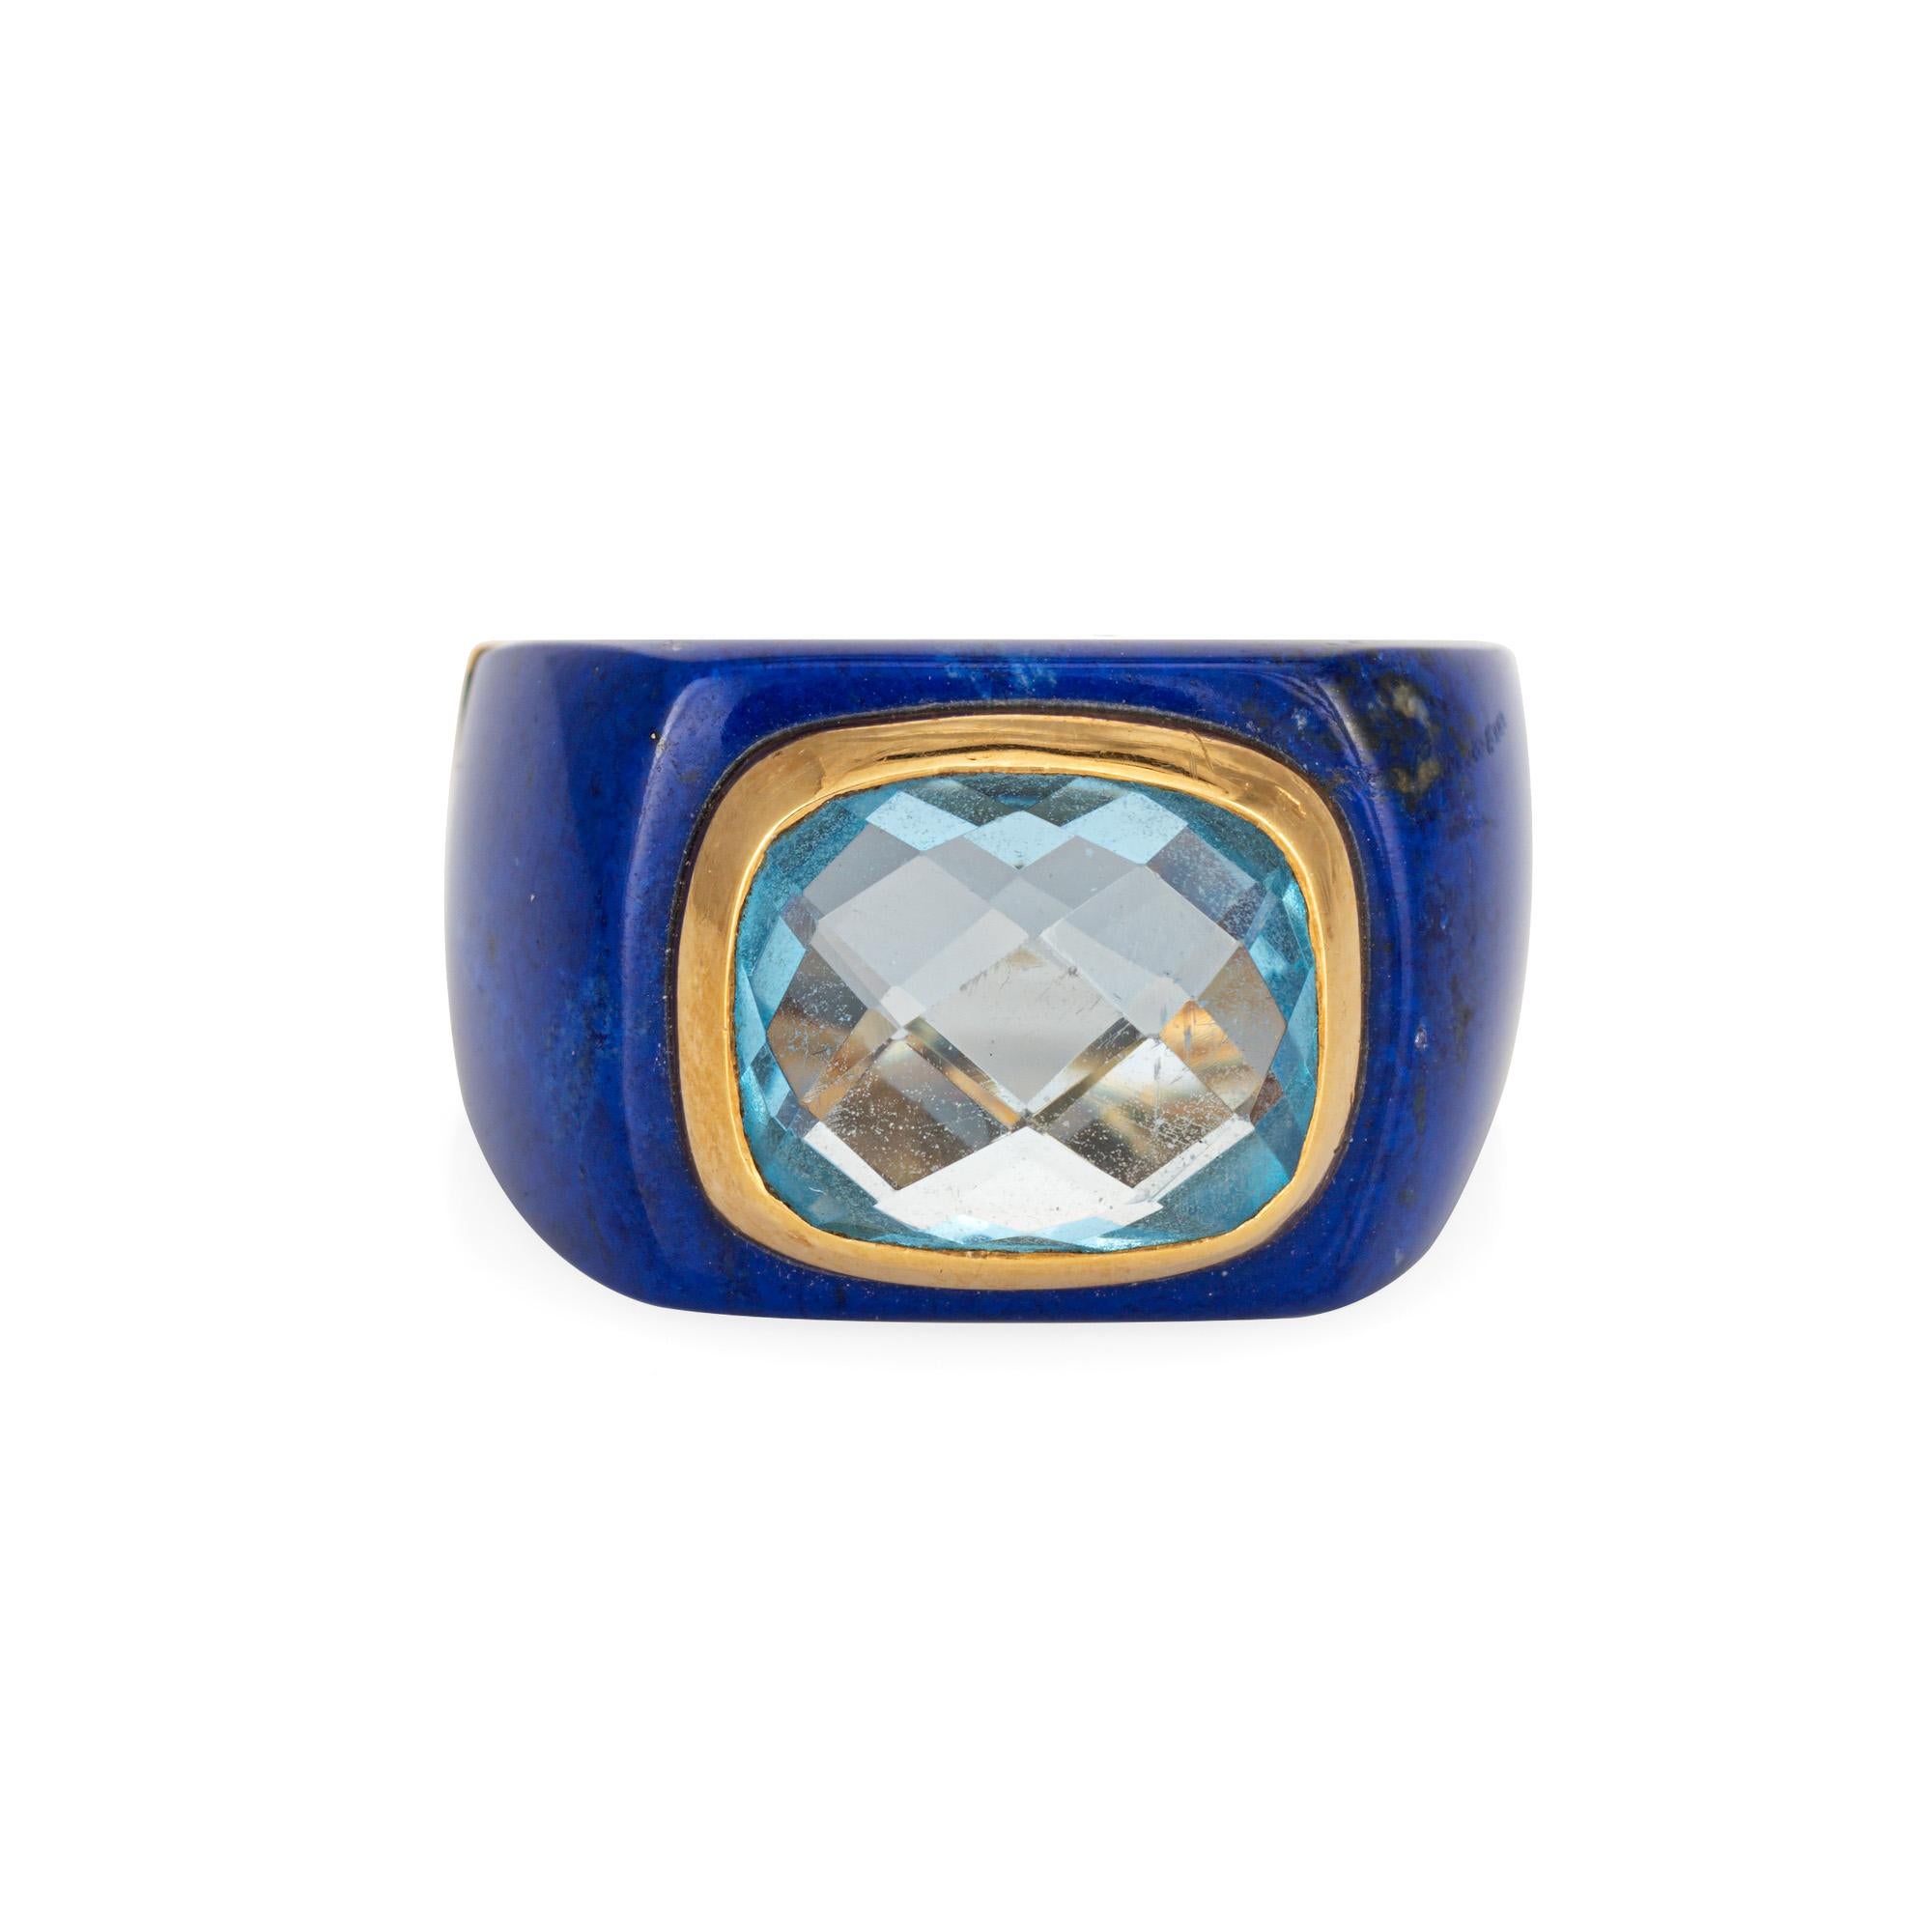 Stylish contemporary estate lapis lazuli & blue topaz cocktail ring crafted in 18 karat yellow gold. 

Checkerboard faceted blue topaz measures 11mm x 9mm. Lapis measures 14mm x 21mm. The topaz and lapis are in very good condition and free of cracks